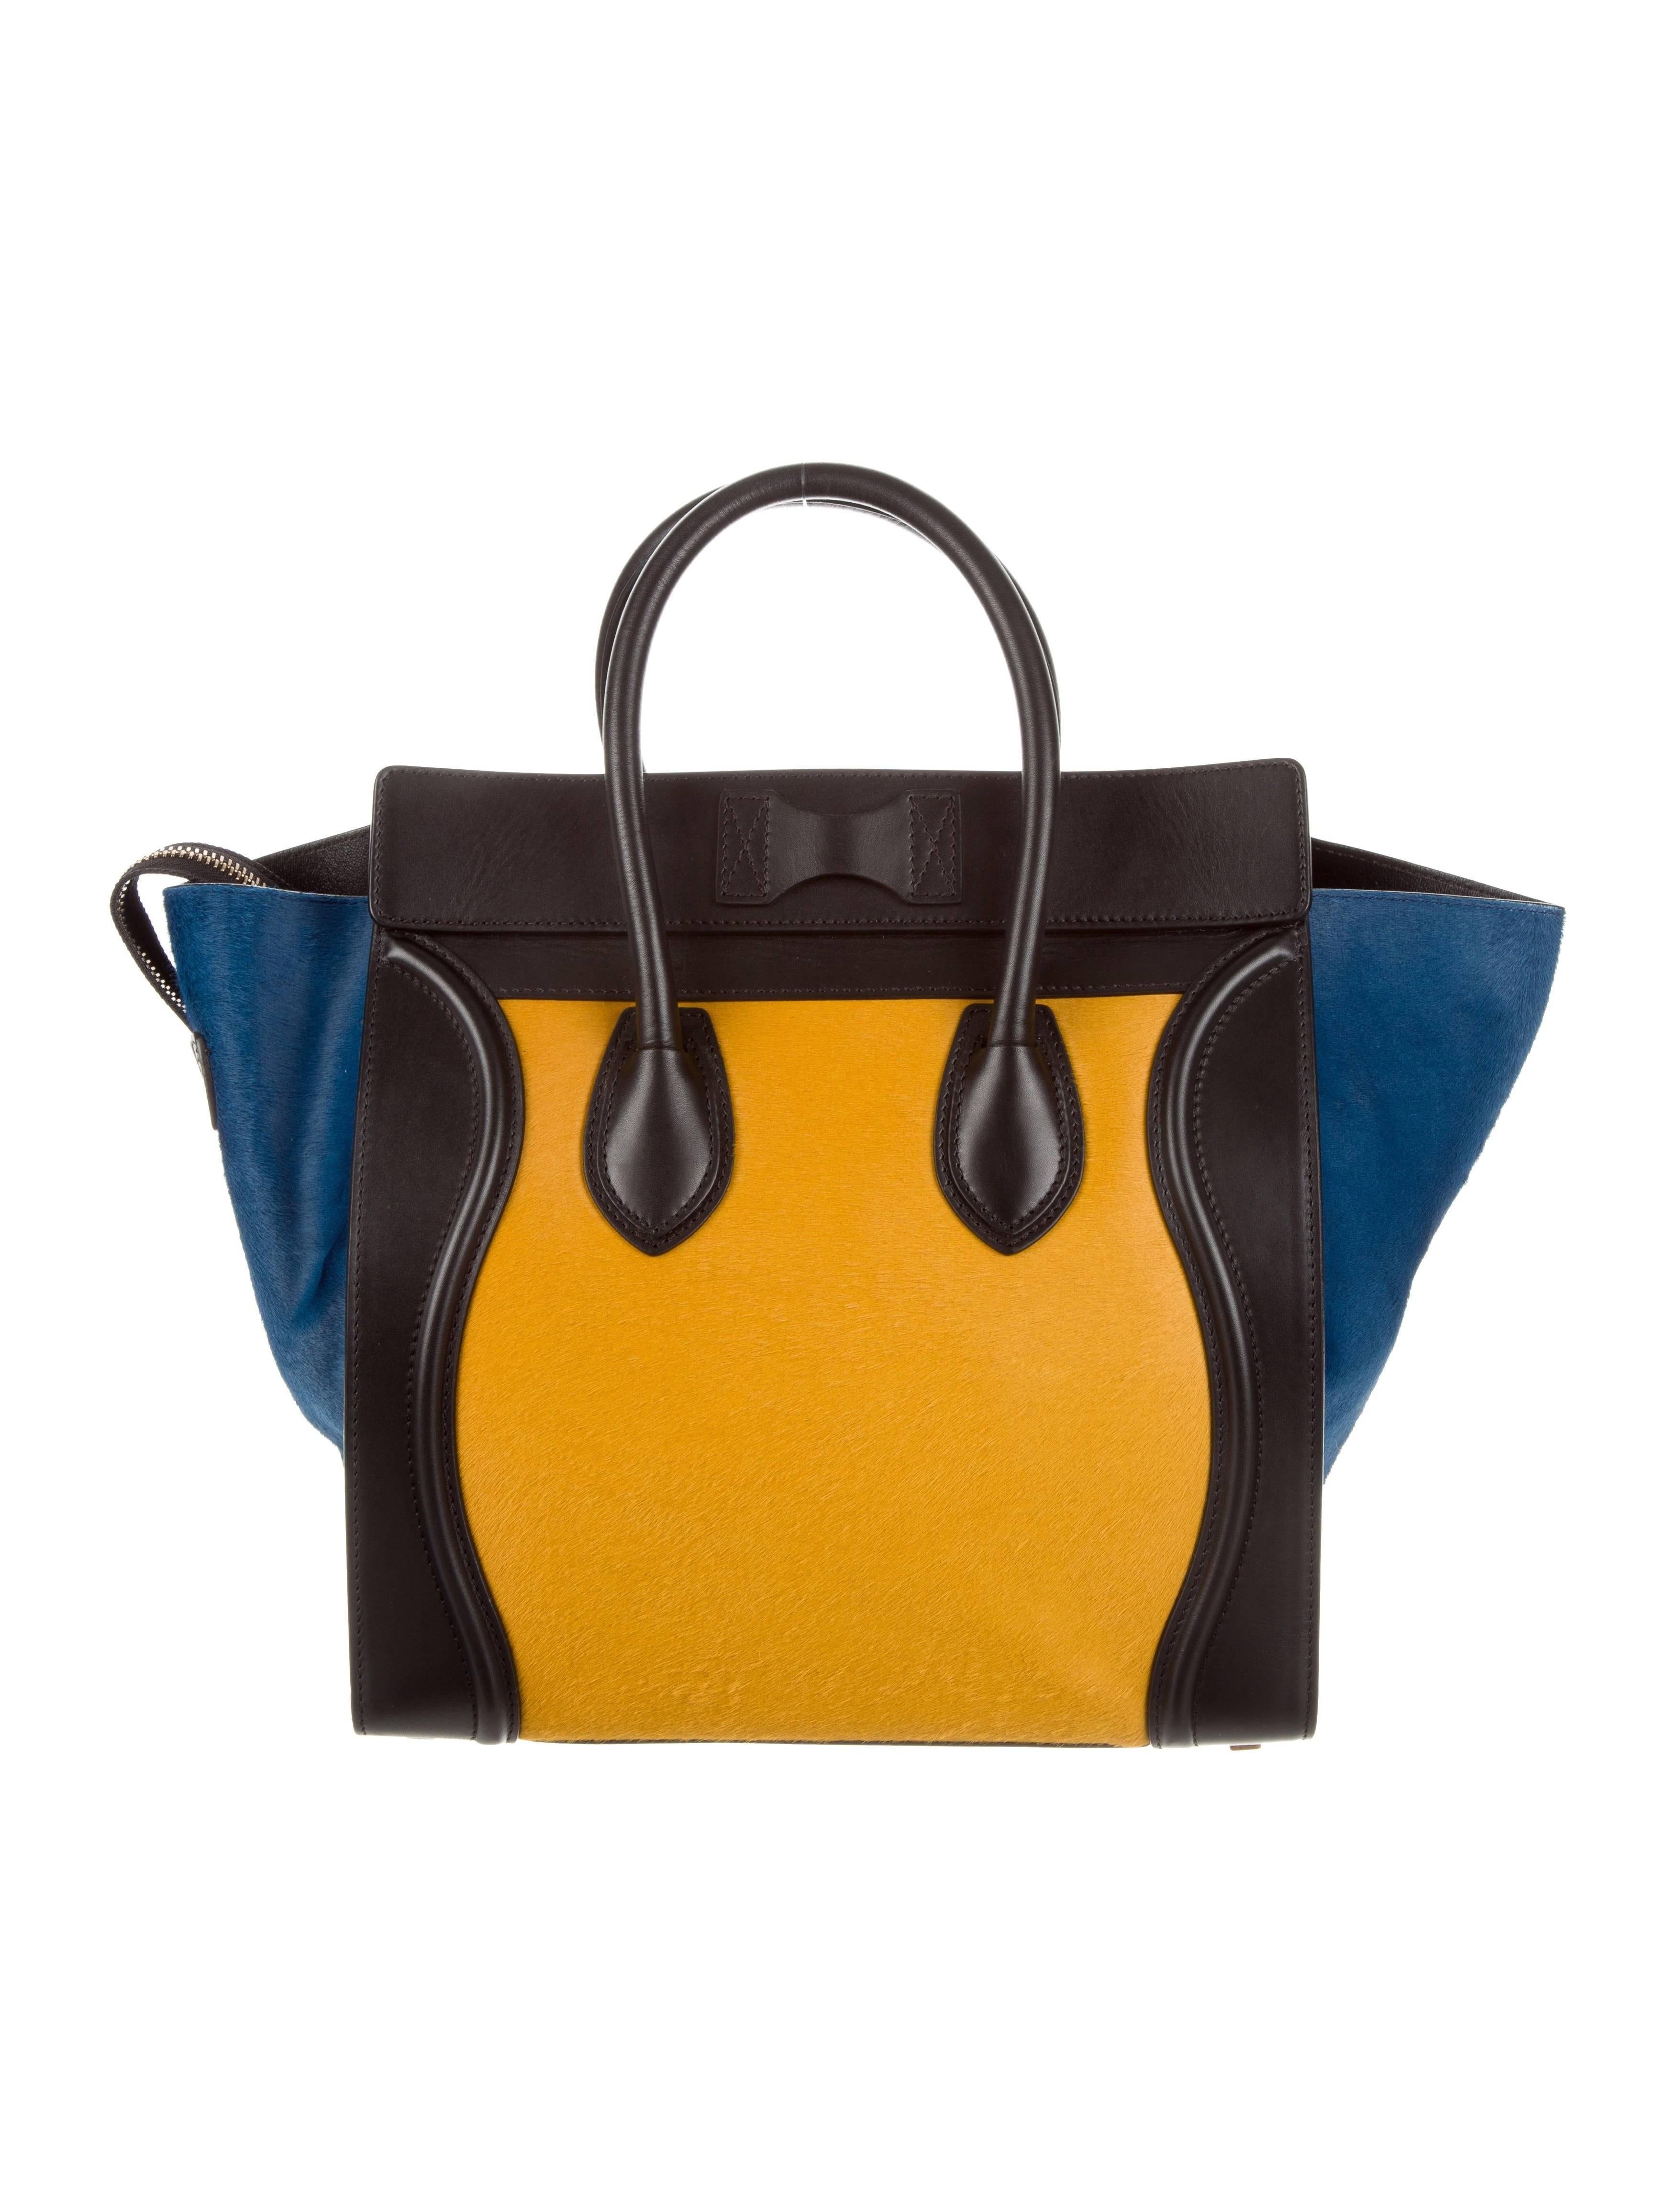 CURATOR'S NOTES

Celine NEW Black Blue Yellow Pony Small Mini Top Handle Satchel Tote Bag

Ponyhair 
Gold tone hardware
Leather lining
Zip closure 
Handle Drop 5